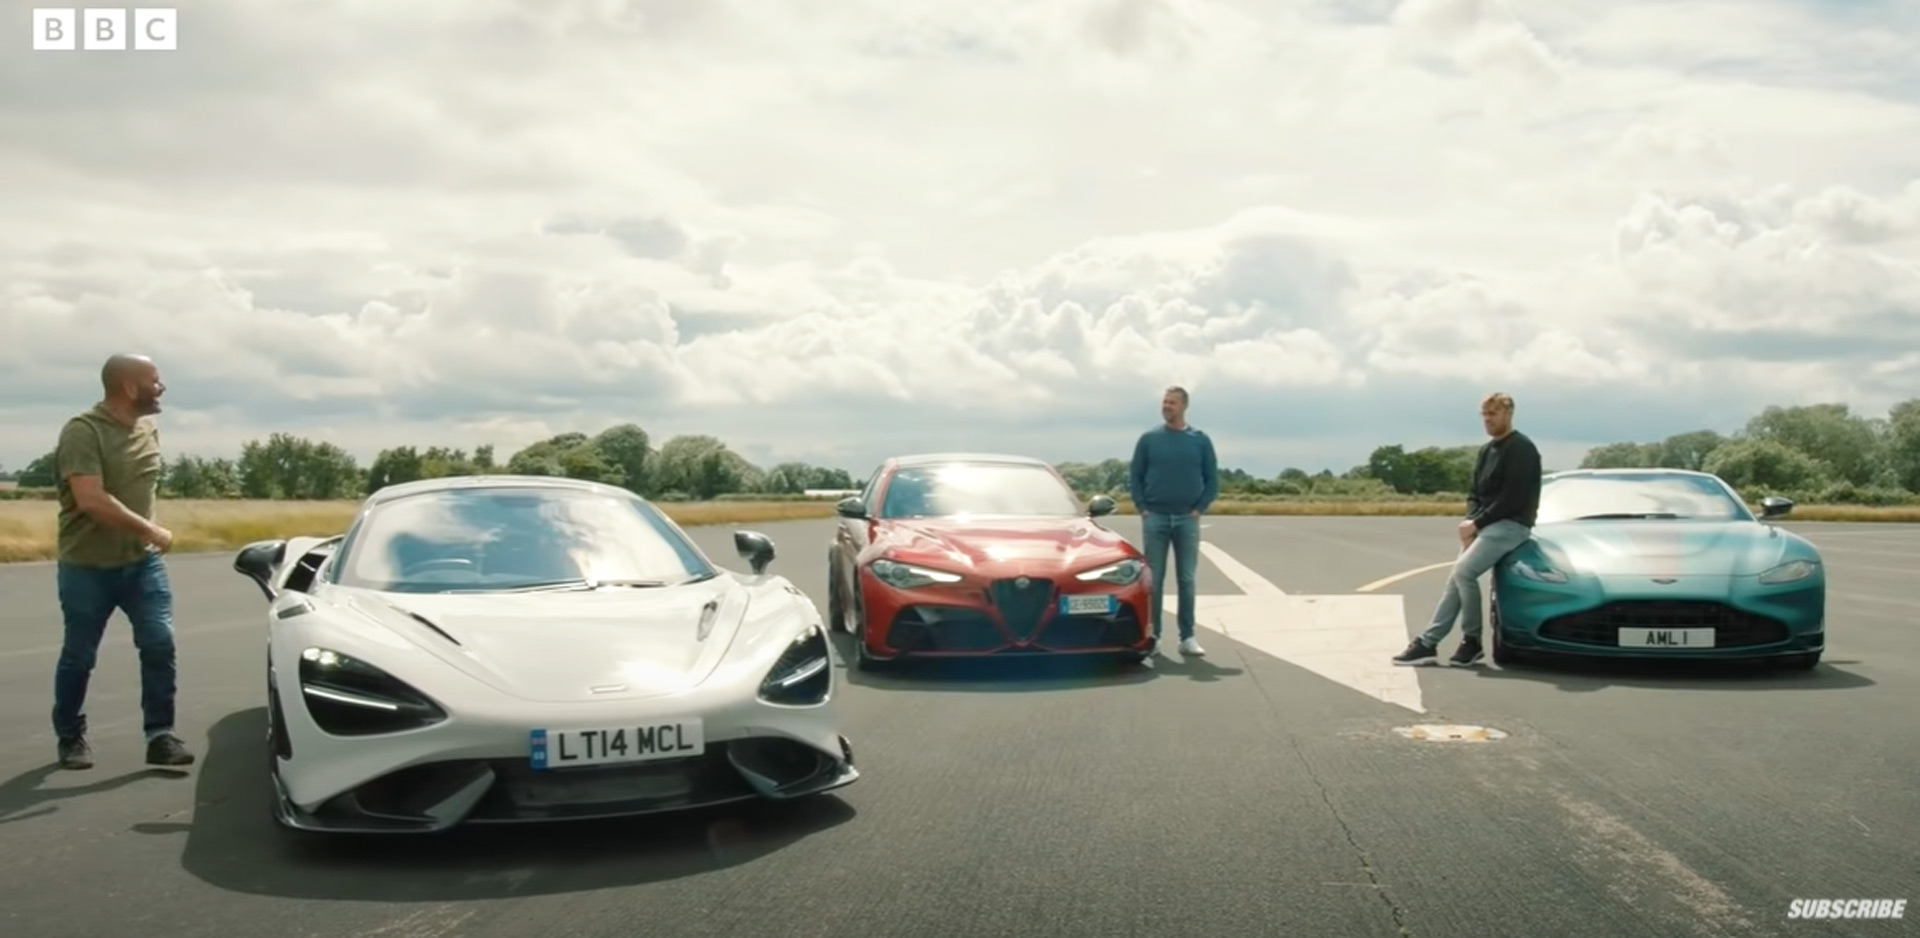 auktion snigmord Økonomi First trailer for “Top Gear” season 31 is out